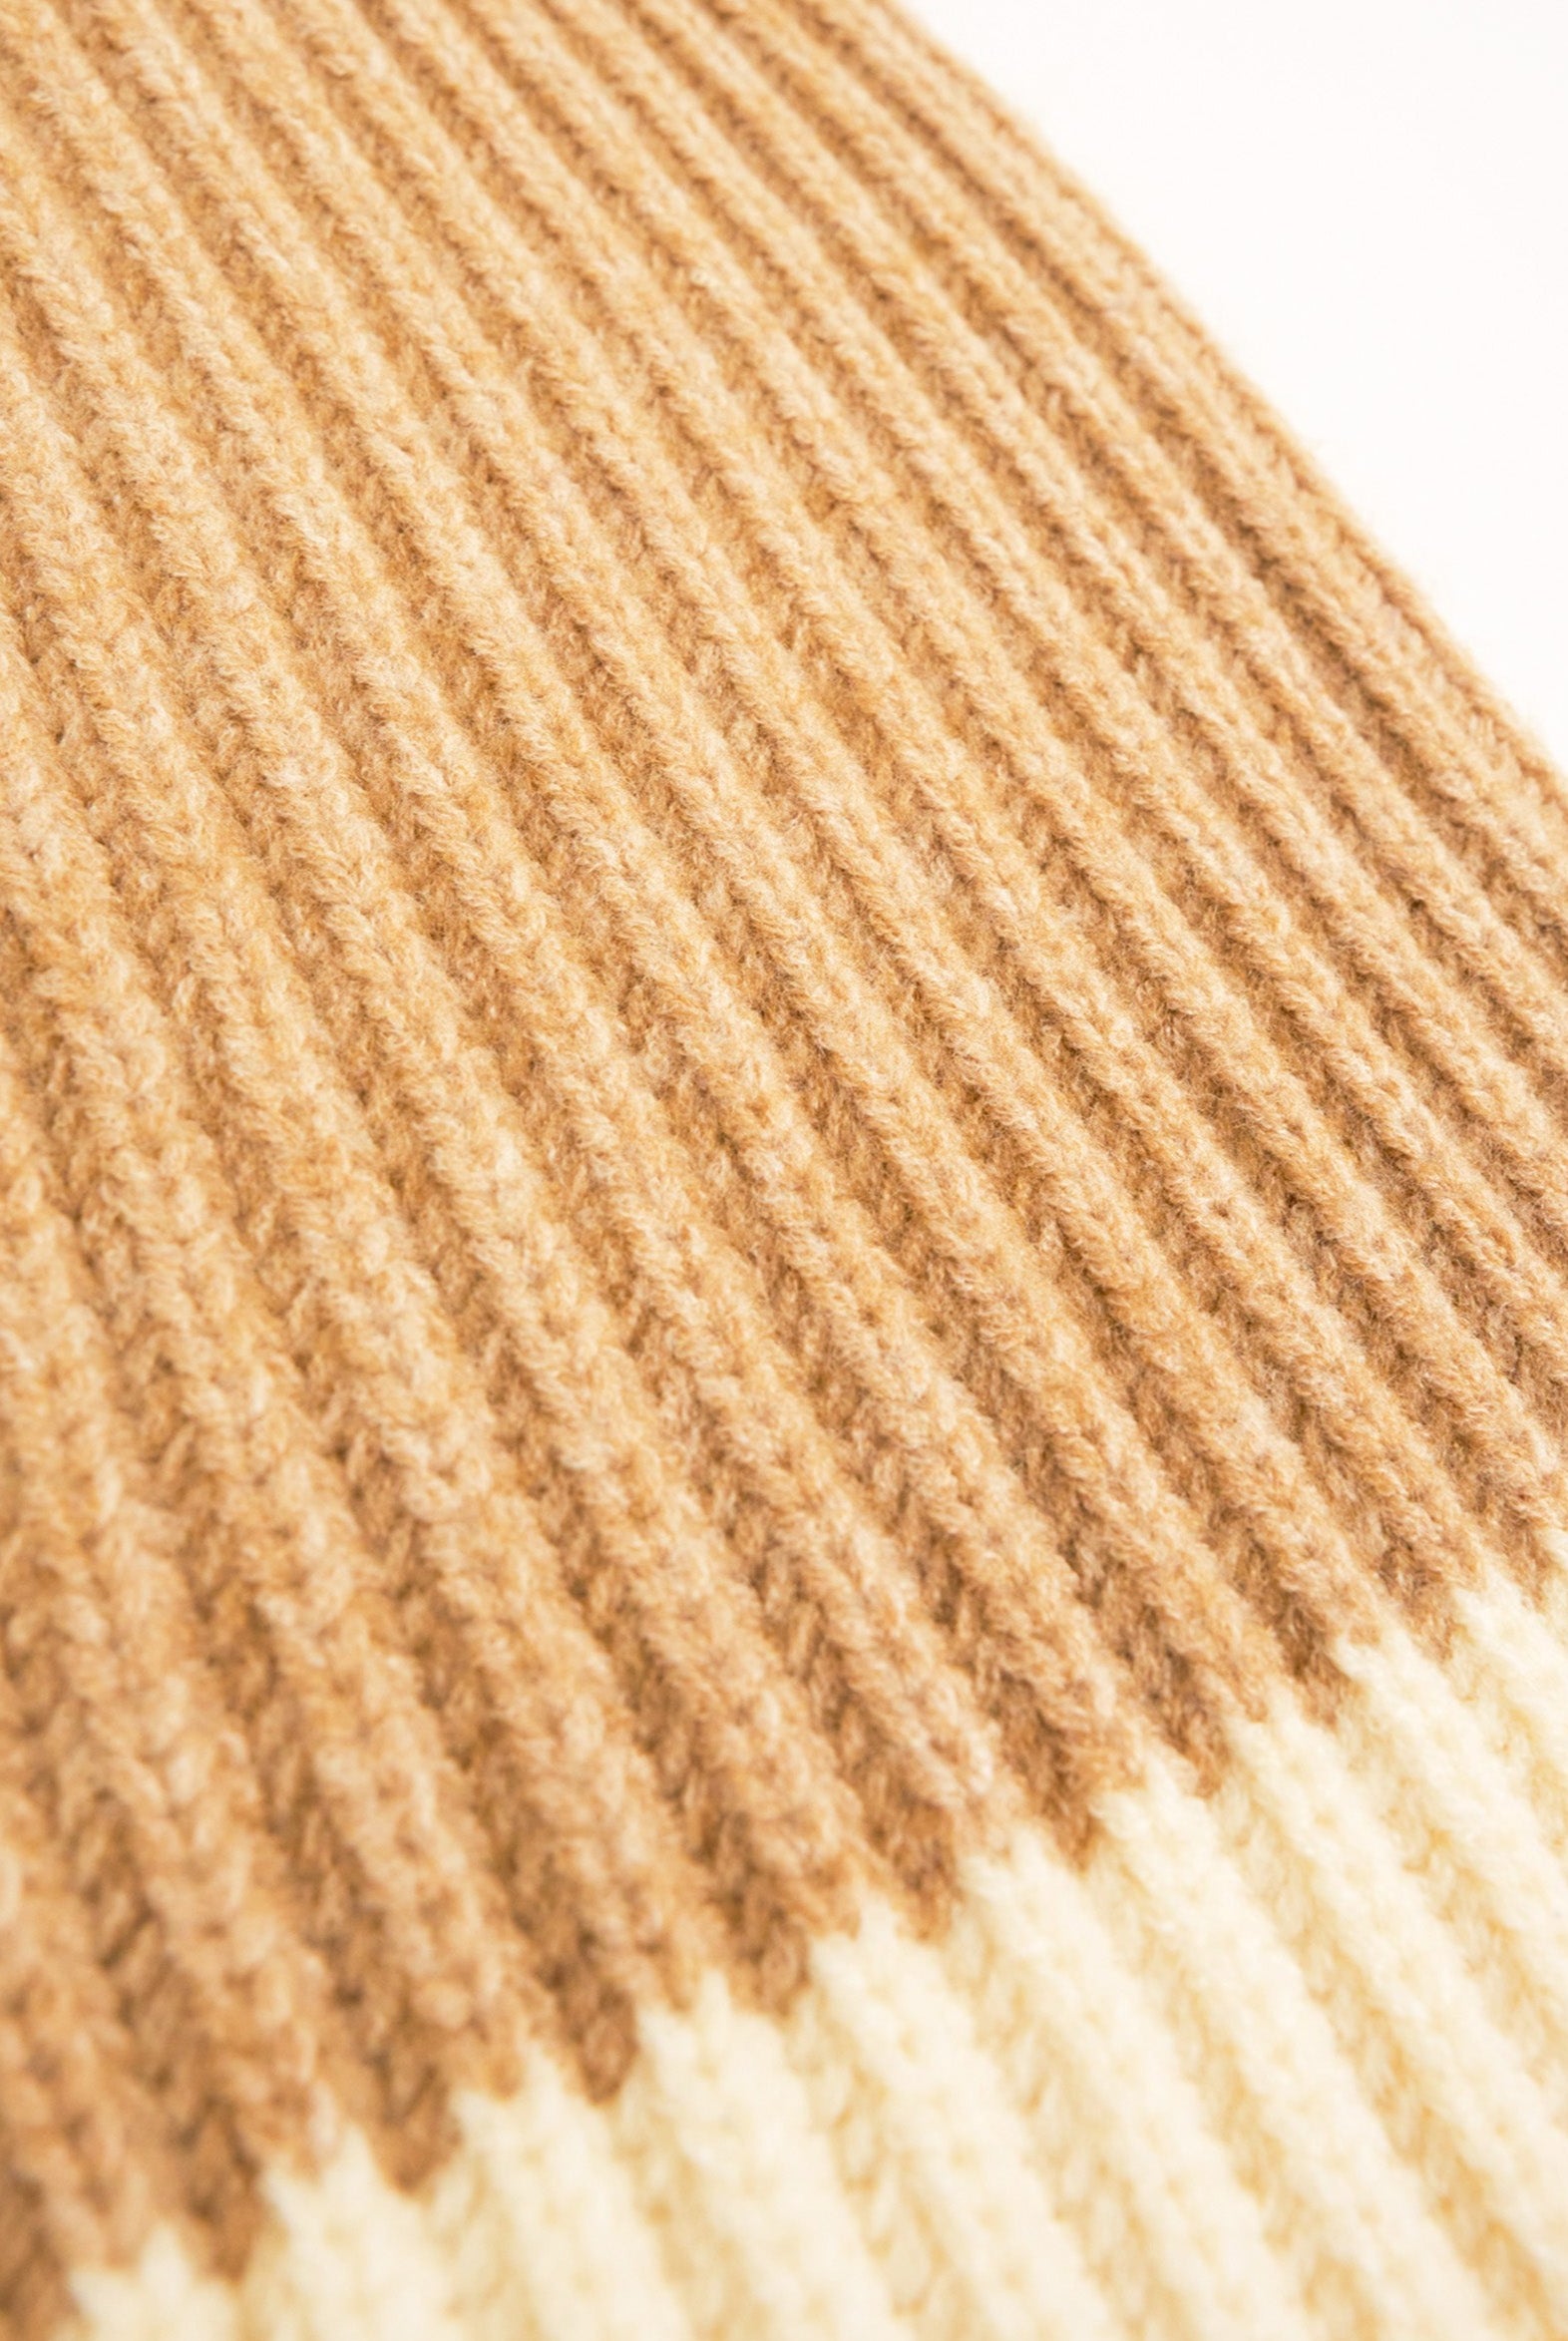 Loose Fit Ribbed Knit Balaclava in Beige | knitted | knitwear | ski | Skiing | Winter | Autumn | Plaza core | Winter Accessories | Autumn Accessories |